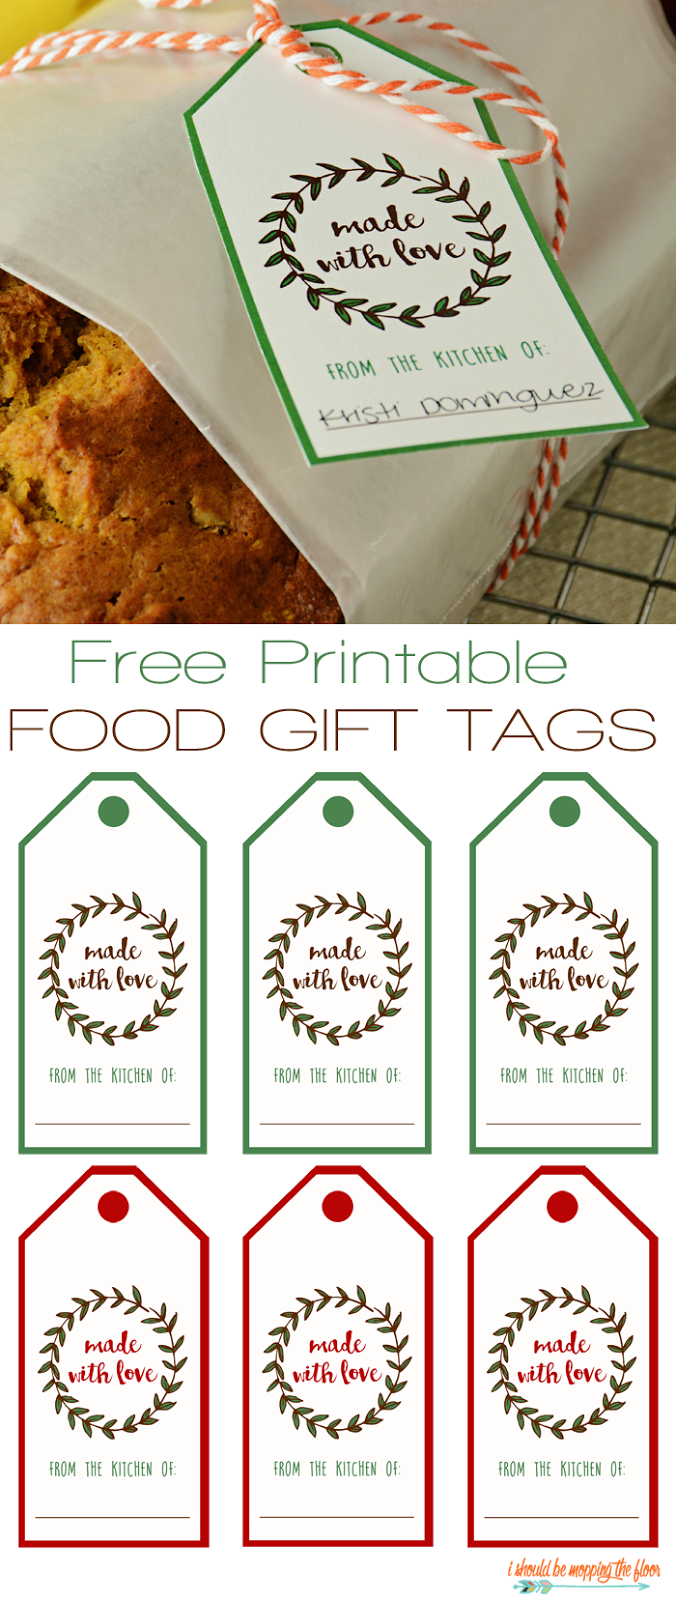 Free Printable Food Gift Tags | ***awesome Things*** | Pinterest - Diy Gift Tags Free Printable